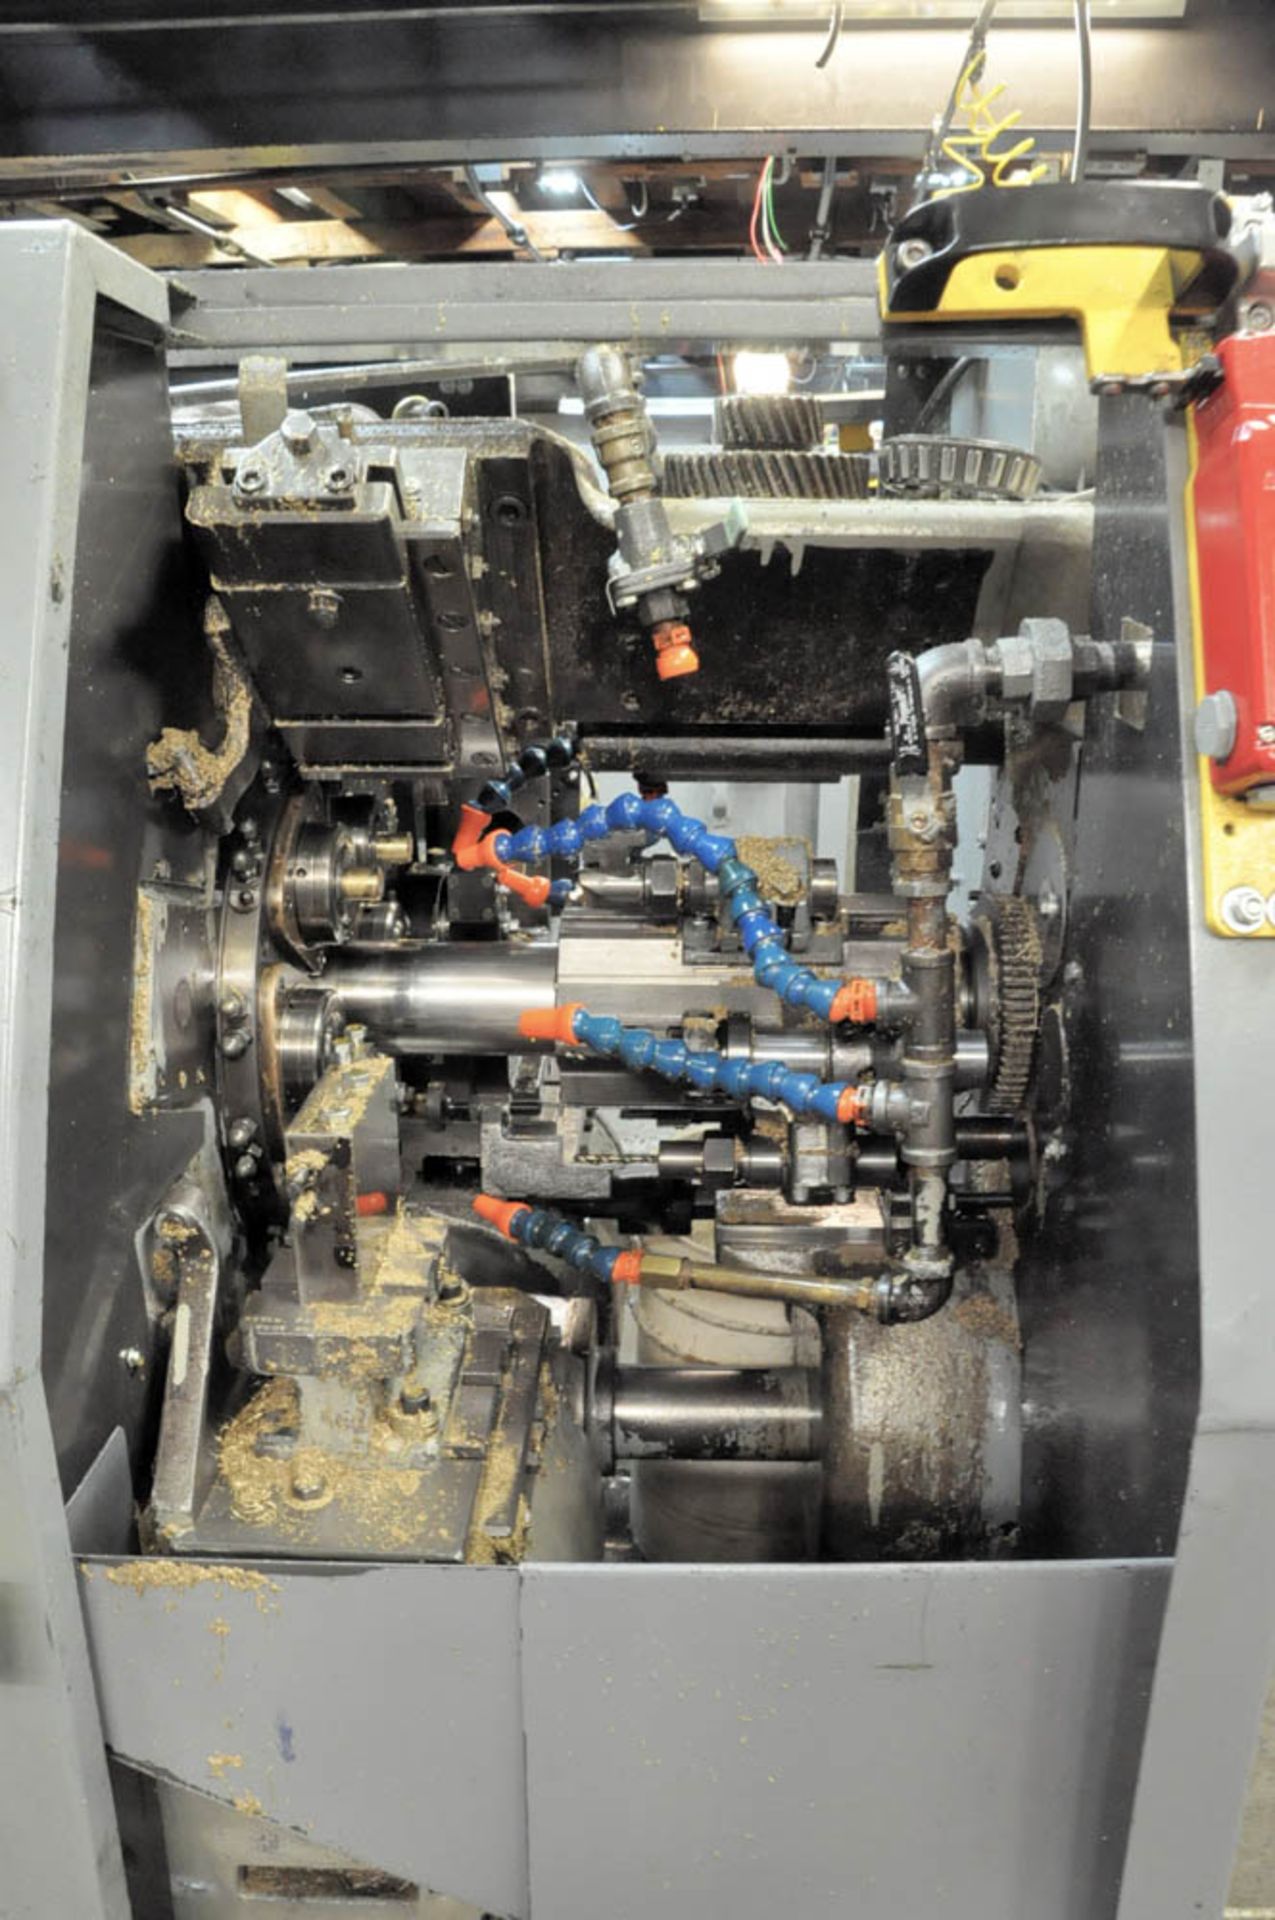 ACME-GRIDLEY MDL. RA-6, 1" CAPACITY AUTOMATIC SCREW MACHINE, S/N:23811, WITH 6-BARREL FEED AND - Image 3 of 5